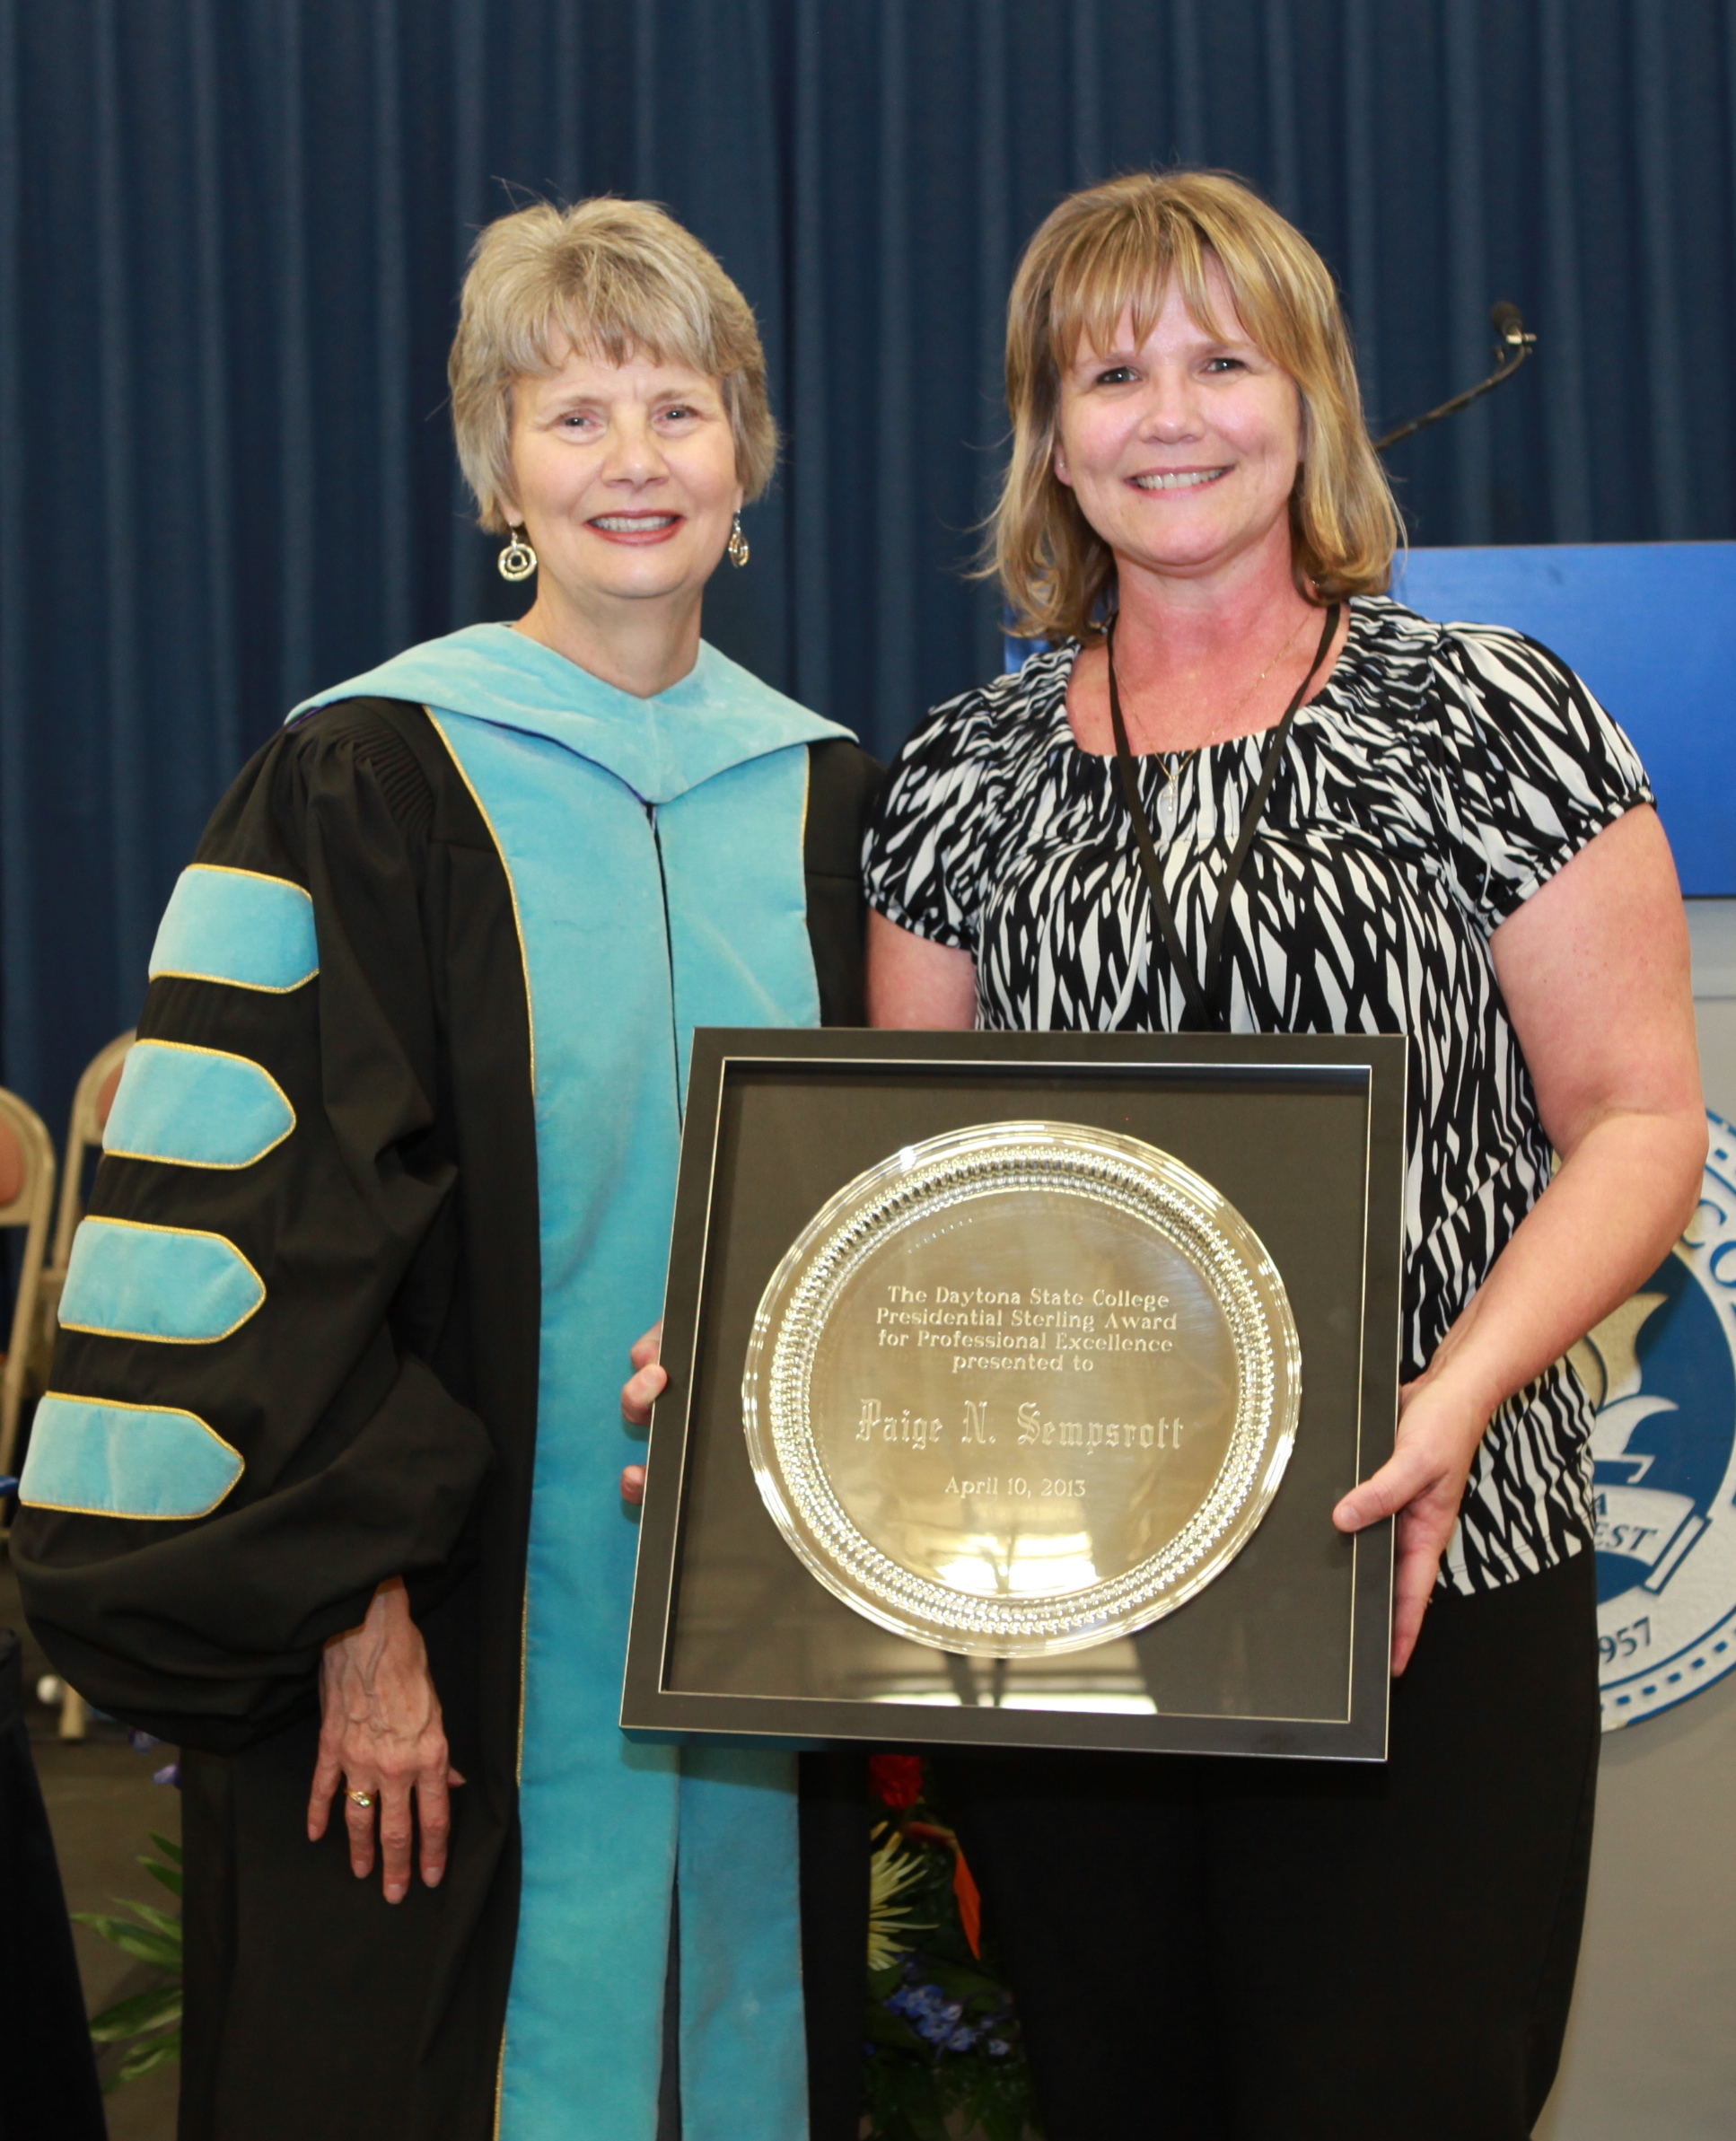 Paige Sempsrott, recipient of the 2013 Presidential Sterling Award for Professional Excellence